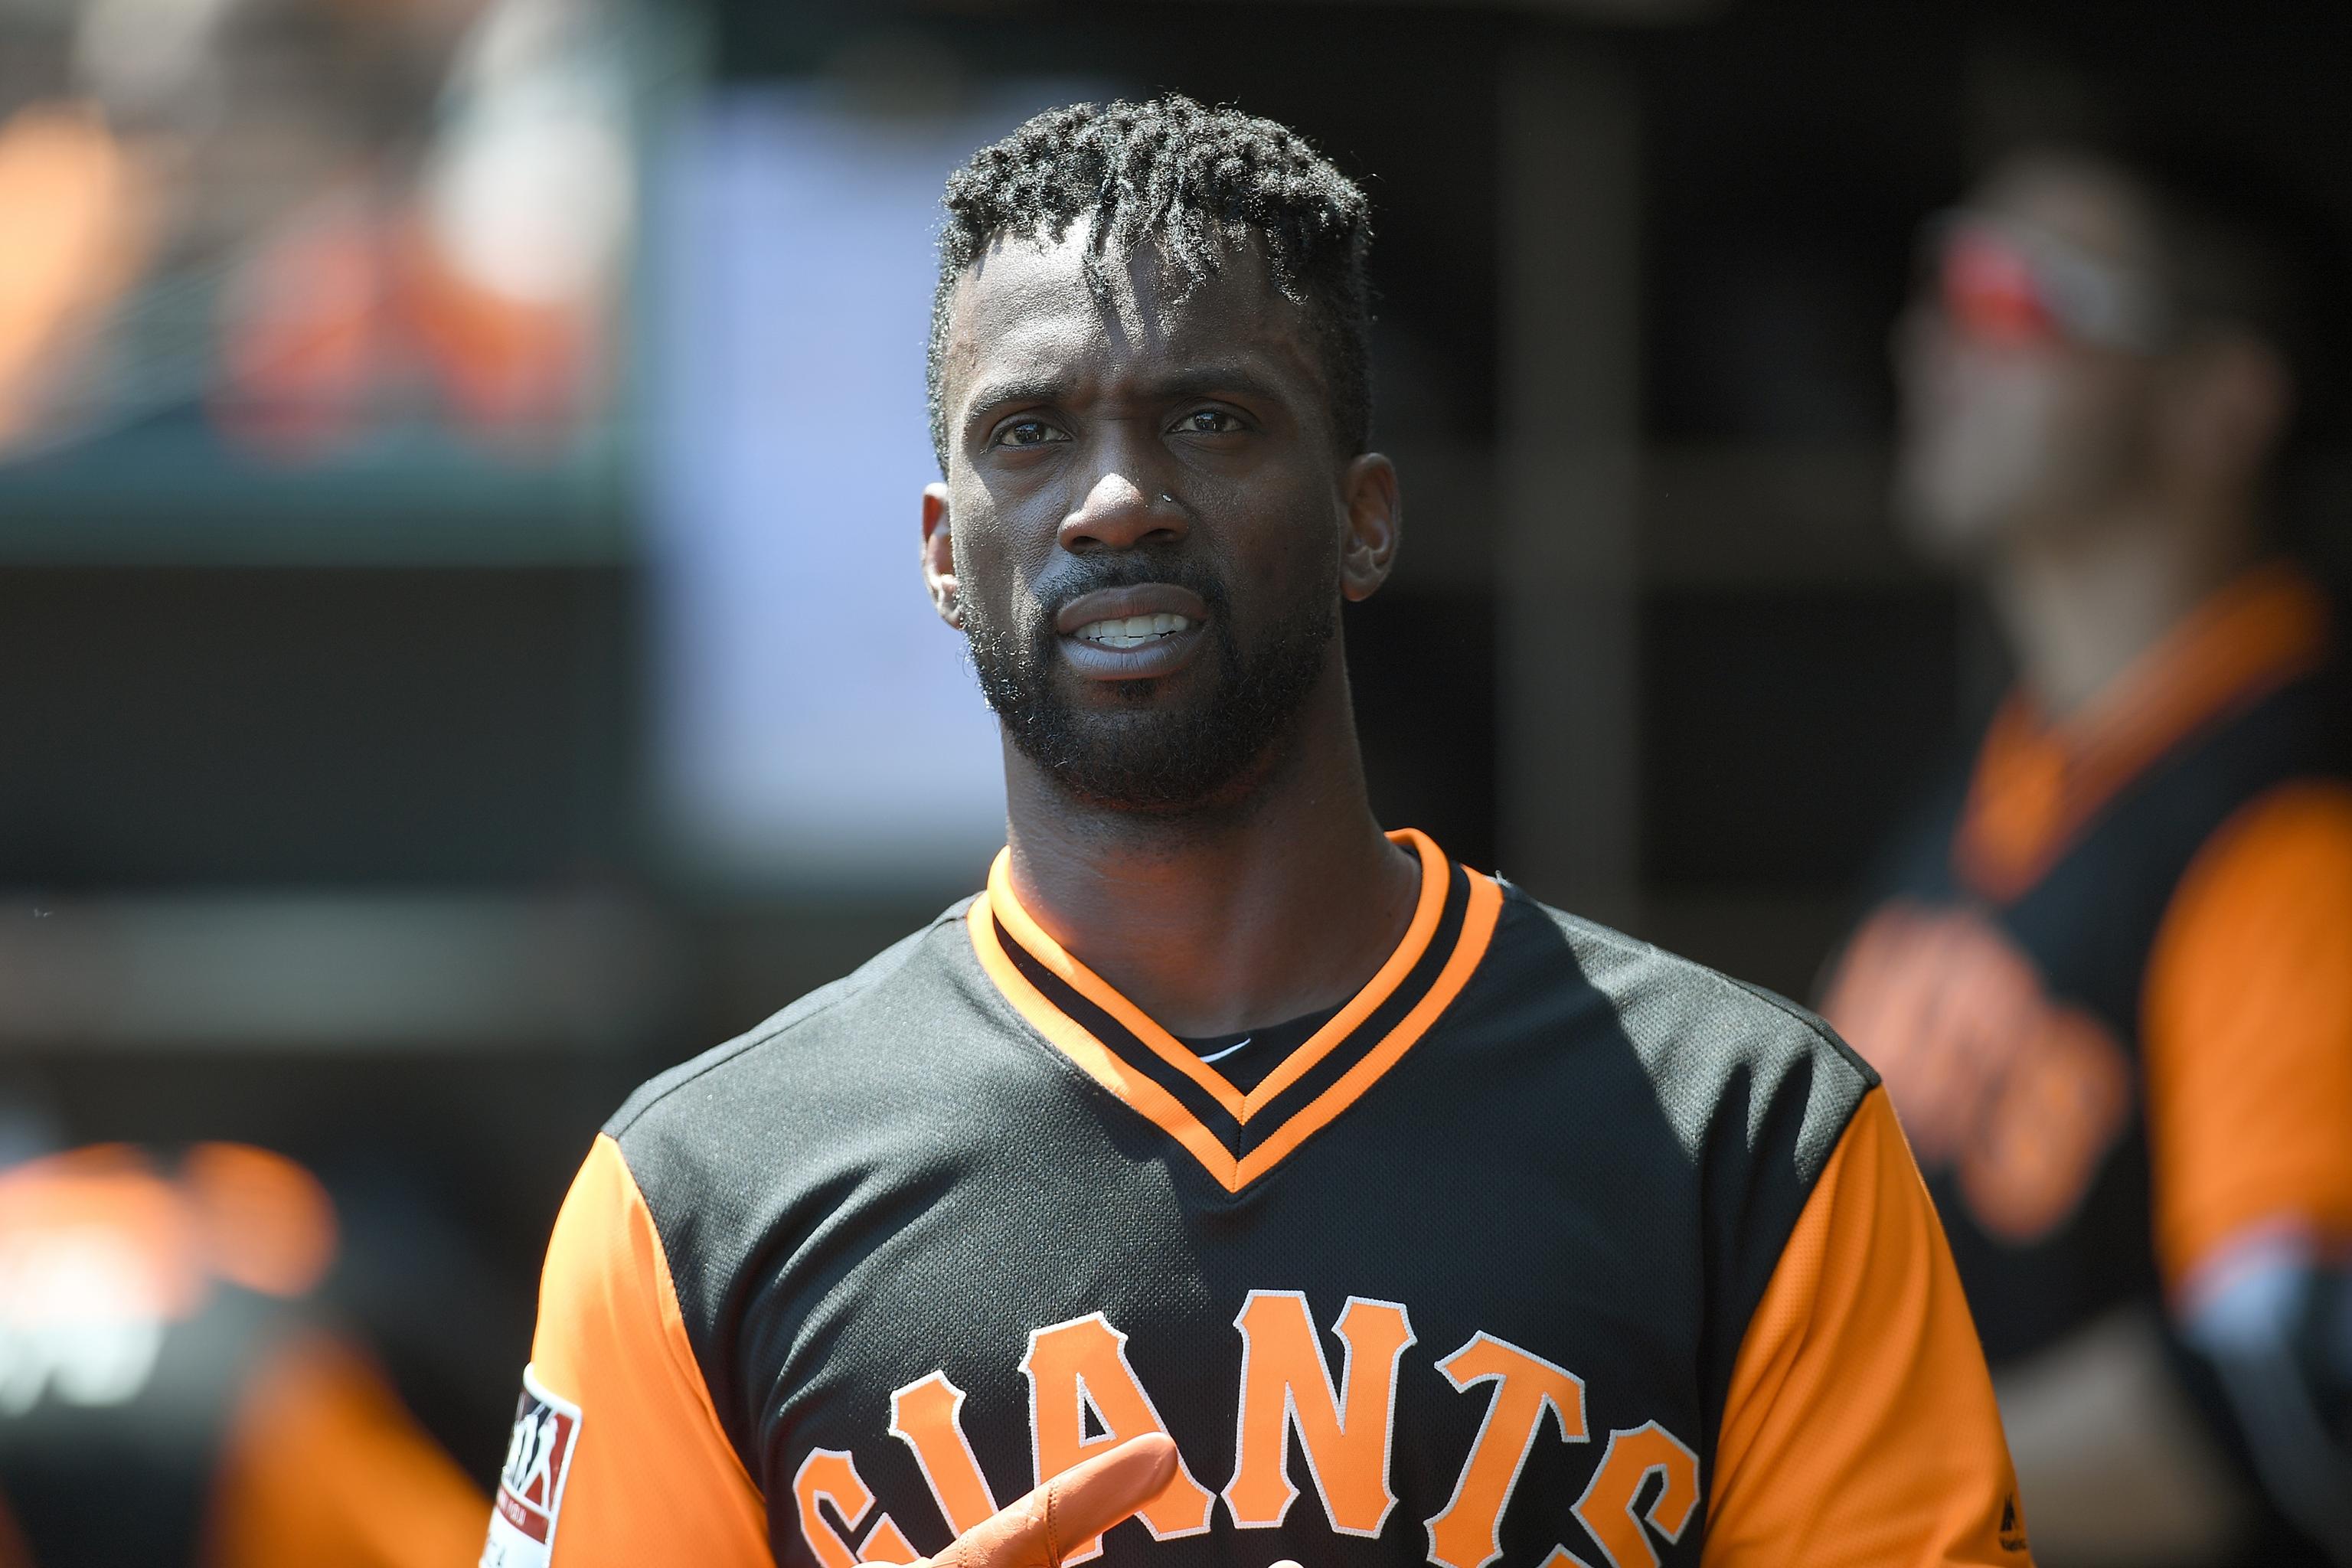 Yankees to get Andrew McCutchen from Giants, per report